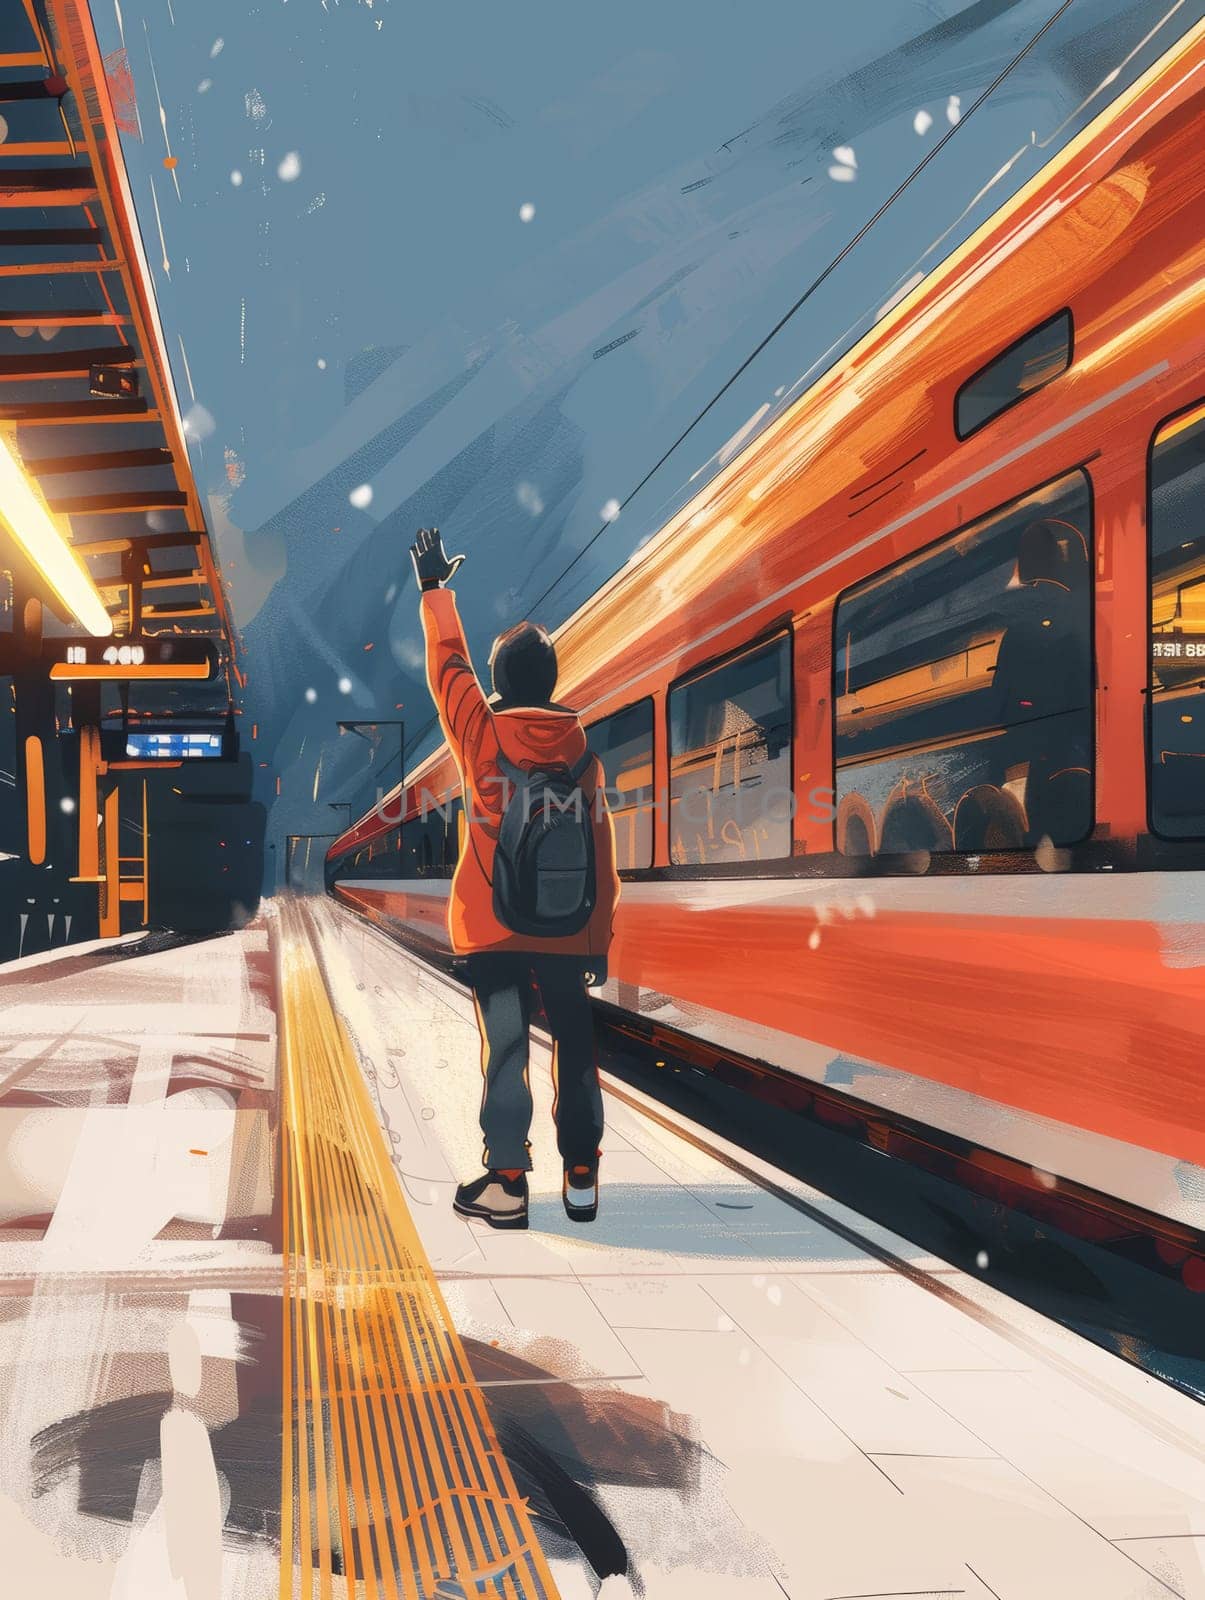 A stylized illustration shows a person waving to a colorful train. The dynamic scene captures the energy of an urban commute